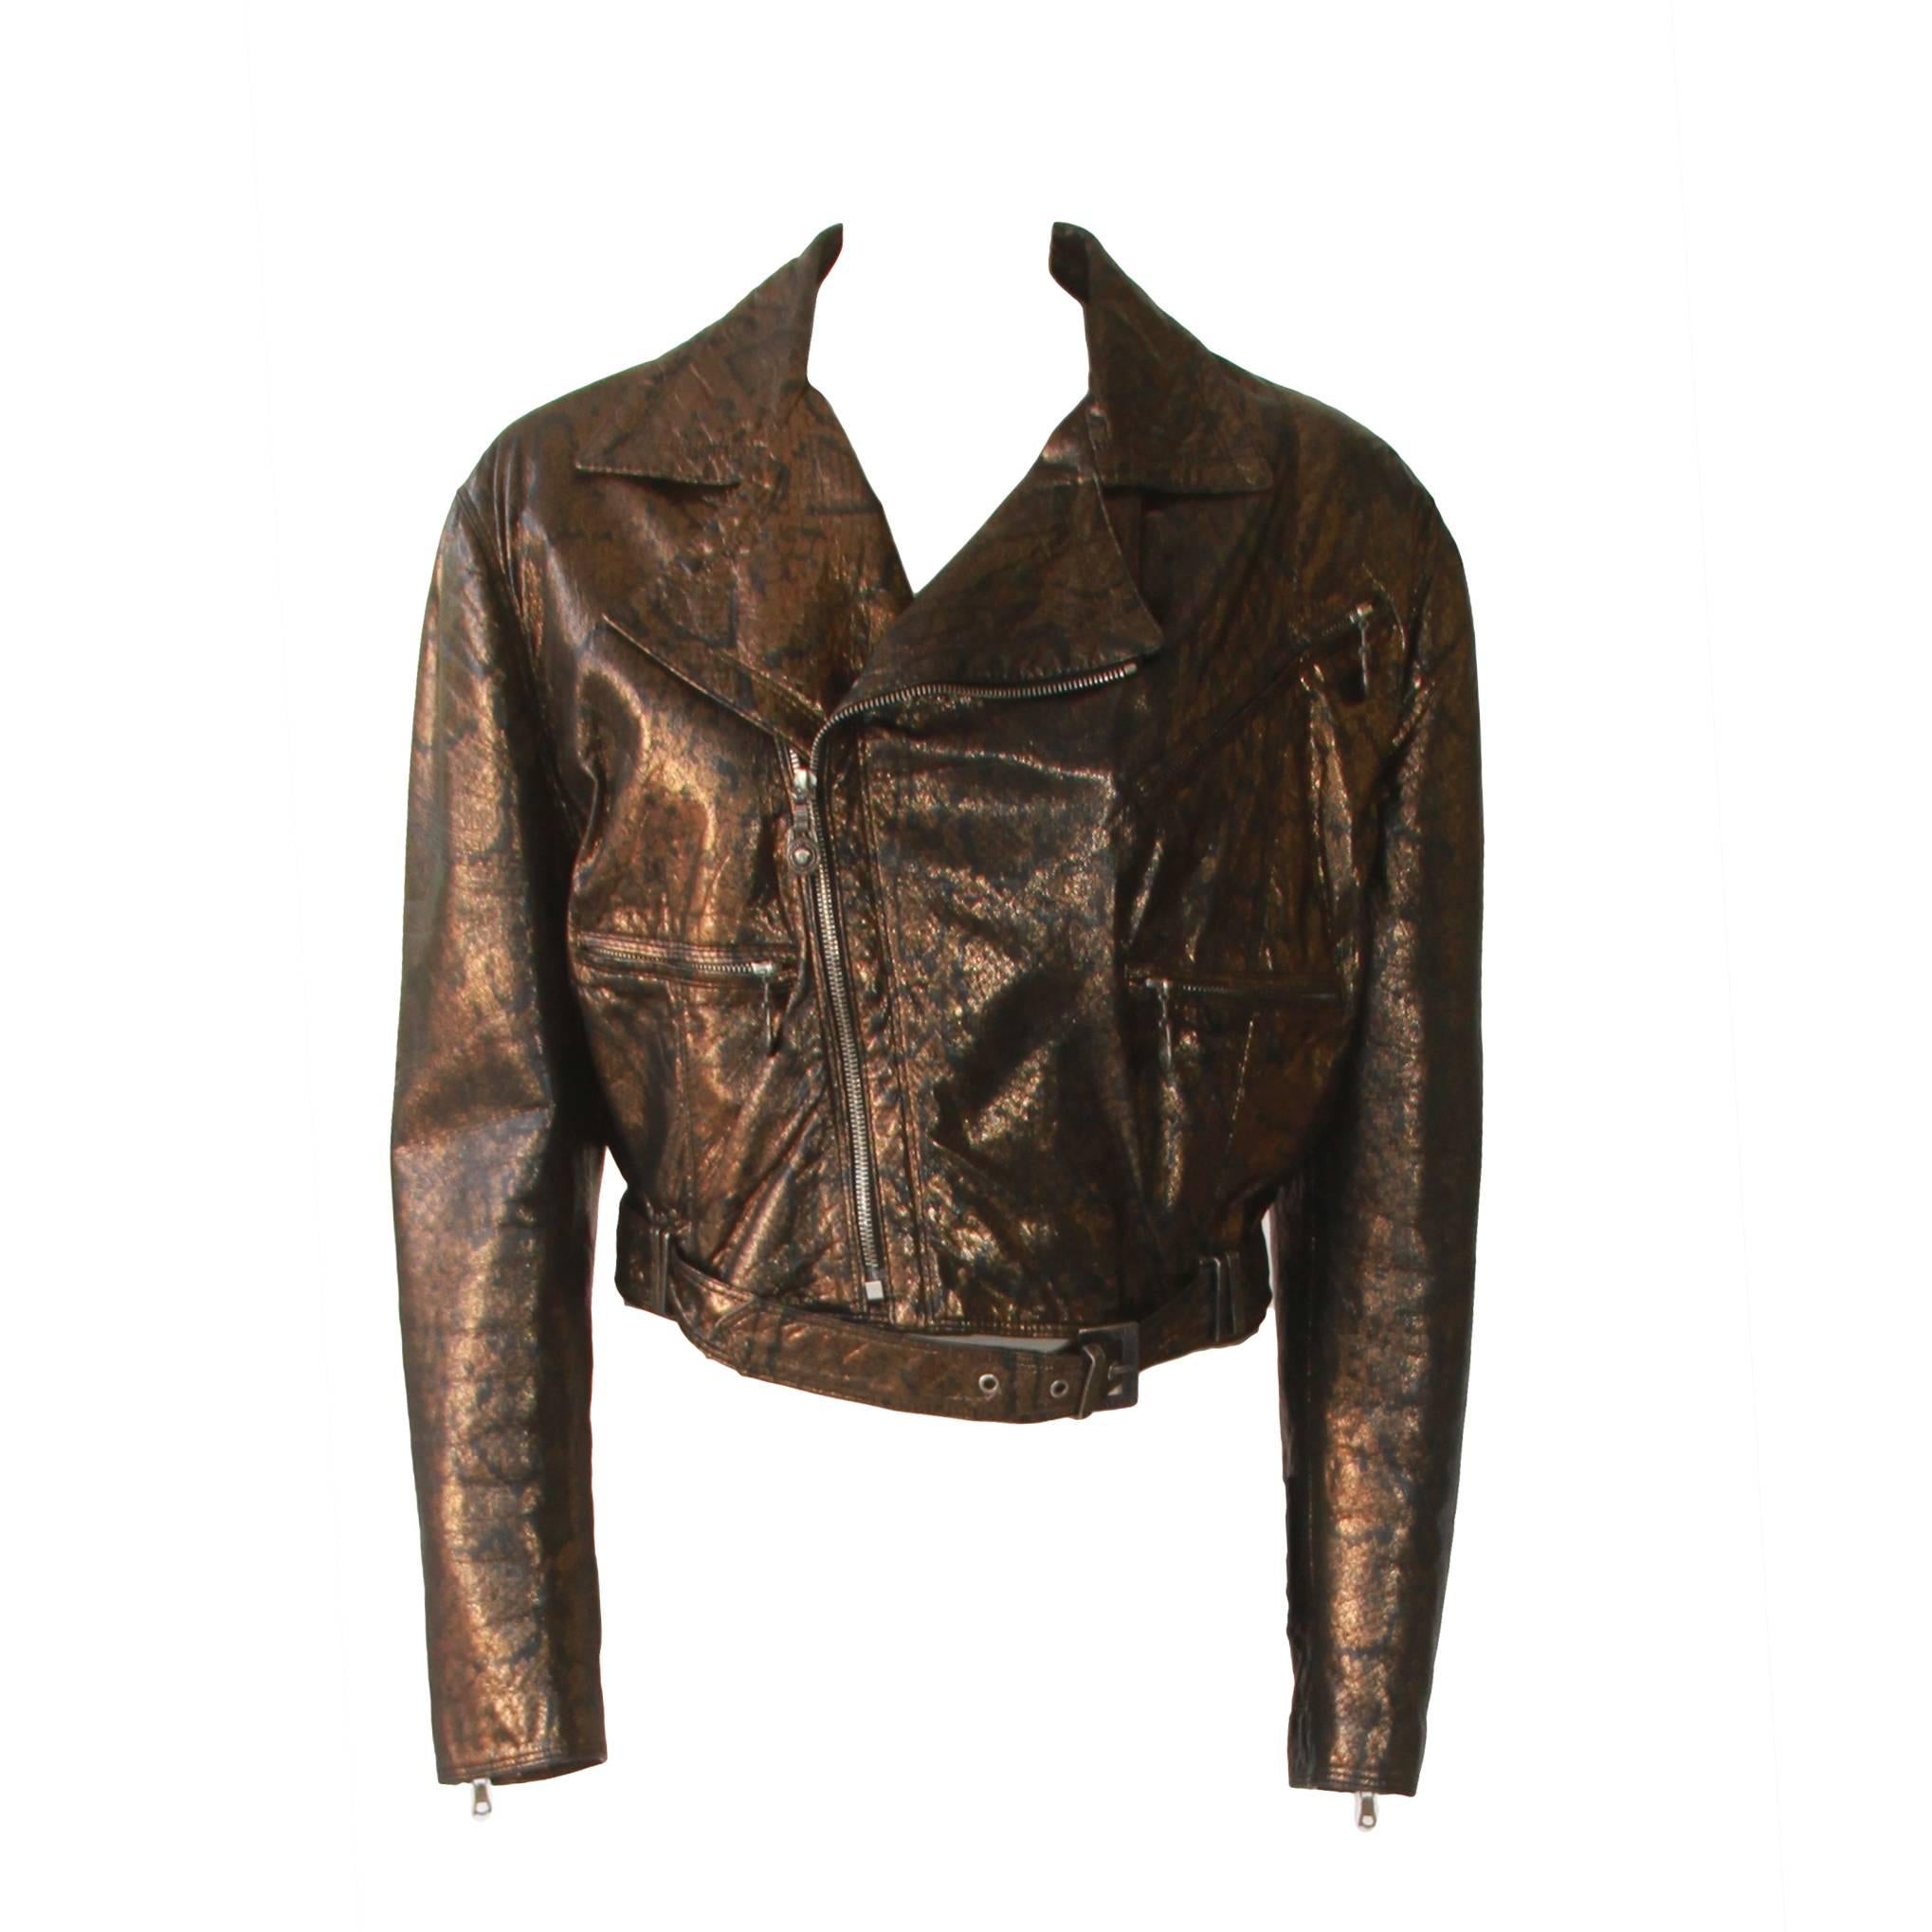 Gianni Versace Leather Biker Jacket Fall 1994 For Sale